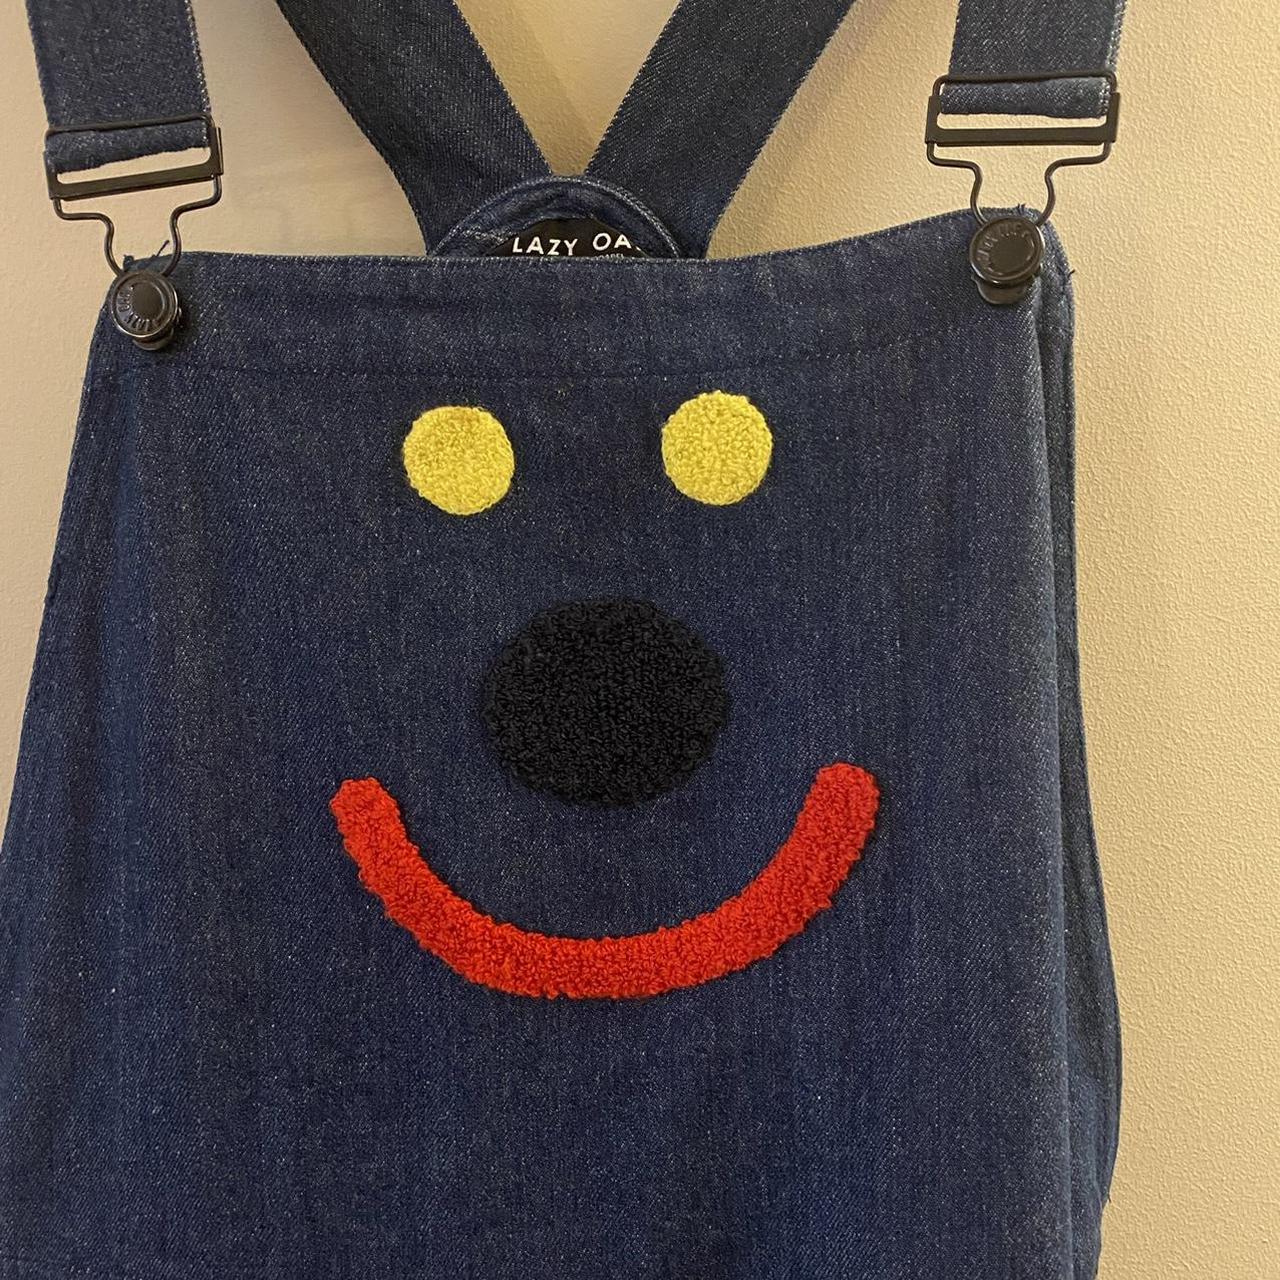 Product Image 2 - Lazy oaf denim overall
Worn a